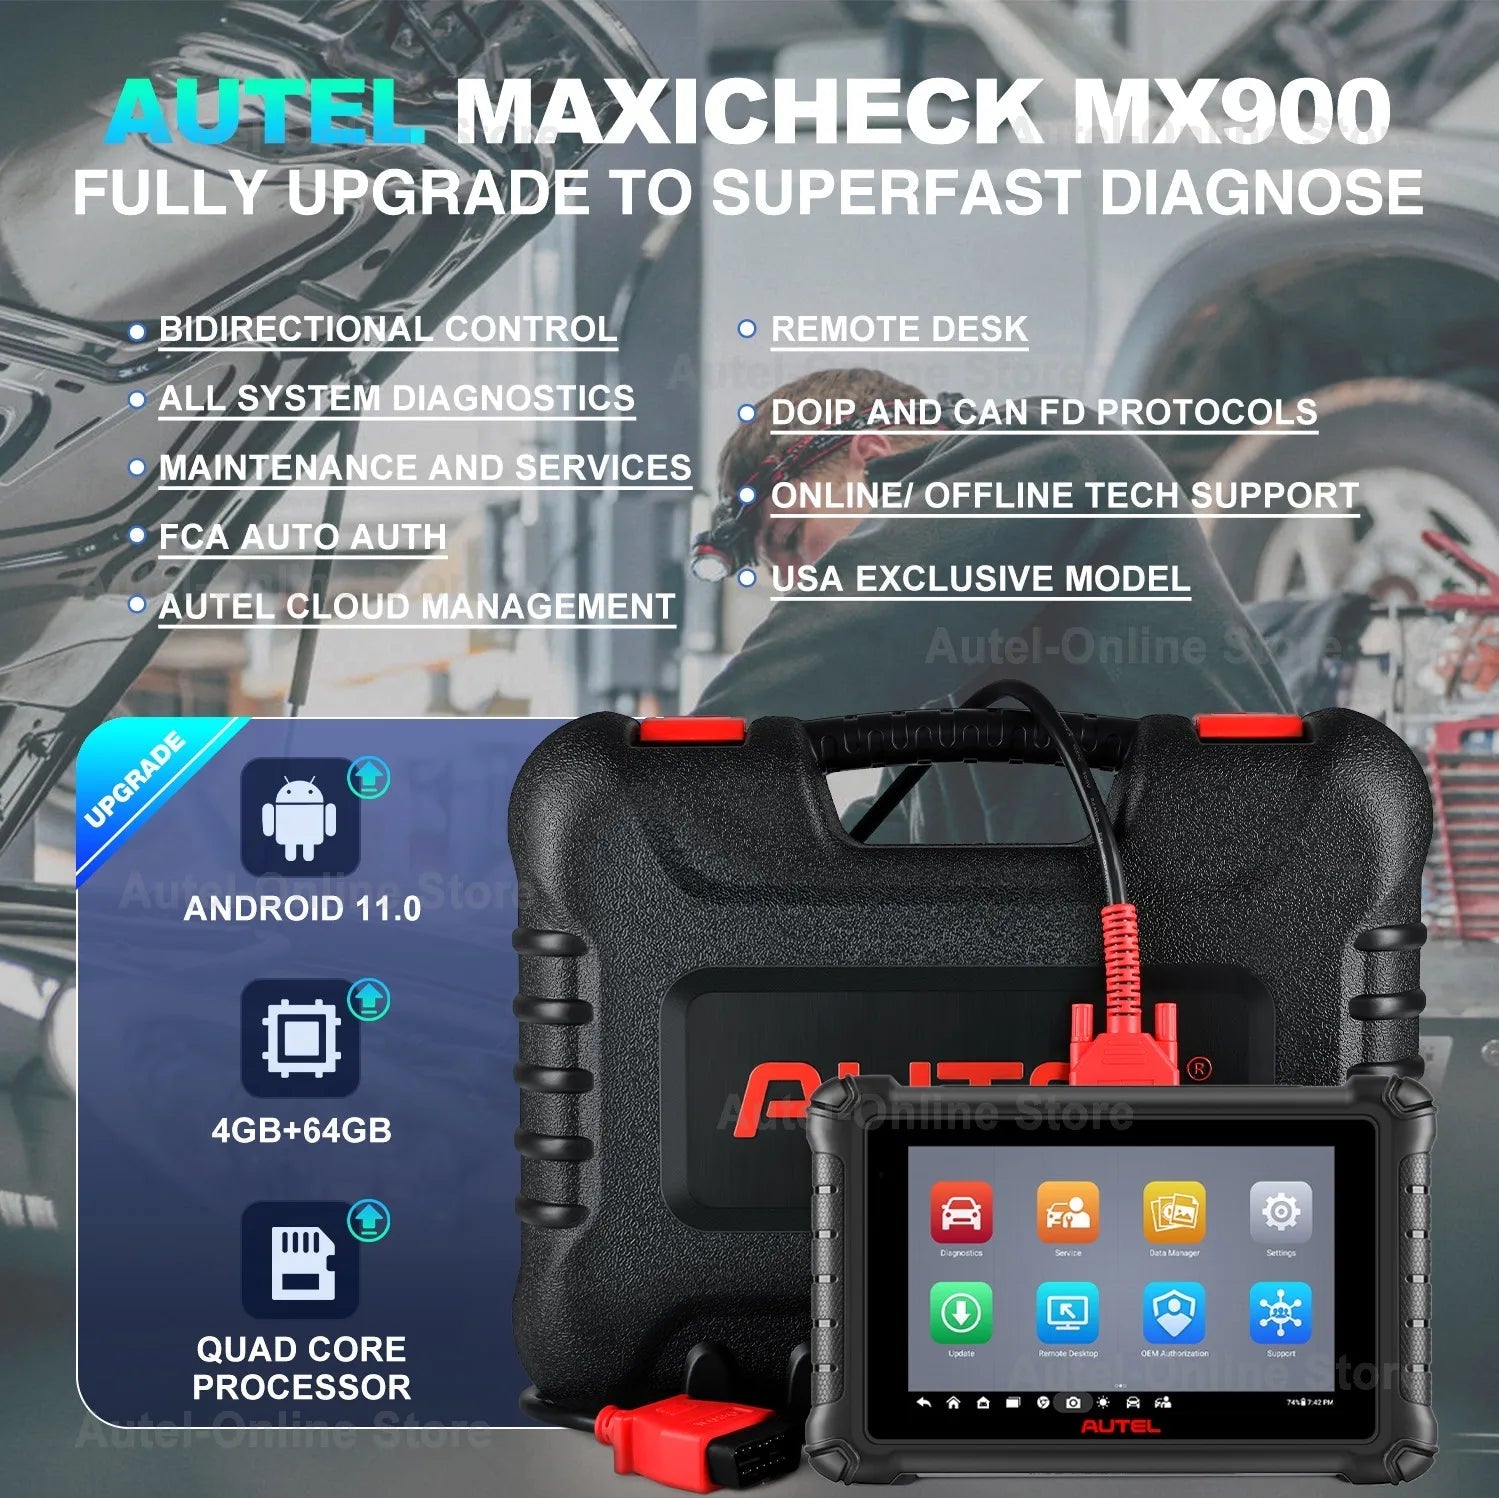 Autel MaxiCheck MX900 Diagnostic Tool, Latin Version Scanner With GM Brazil, Fiat Brazil, VW Brazil, CAN FD, 3 Years Update - Dynamex